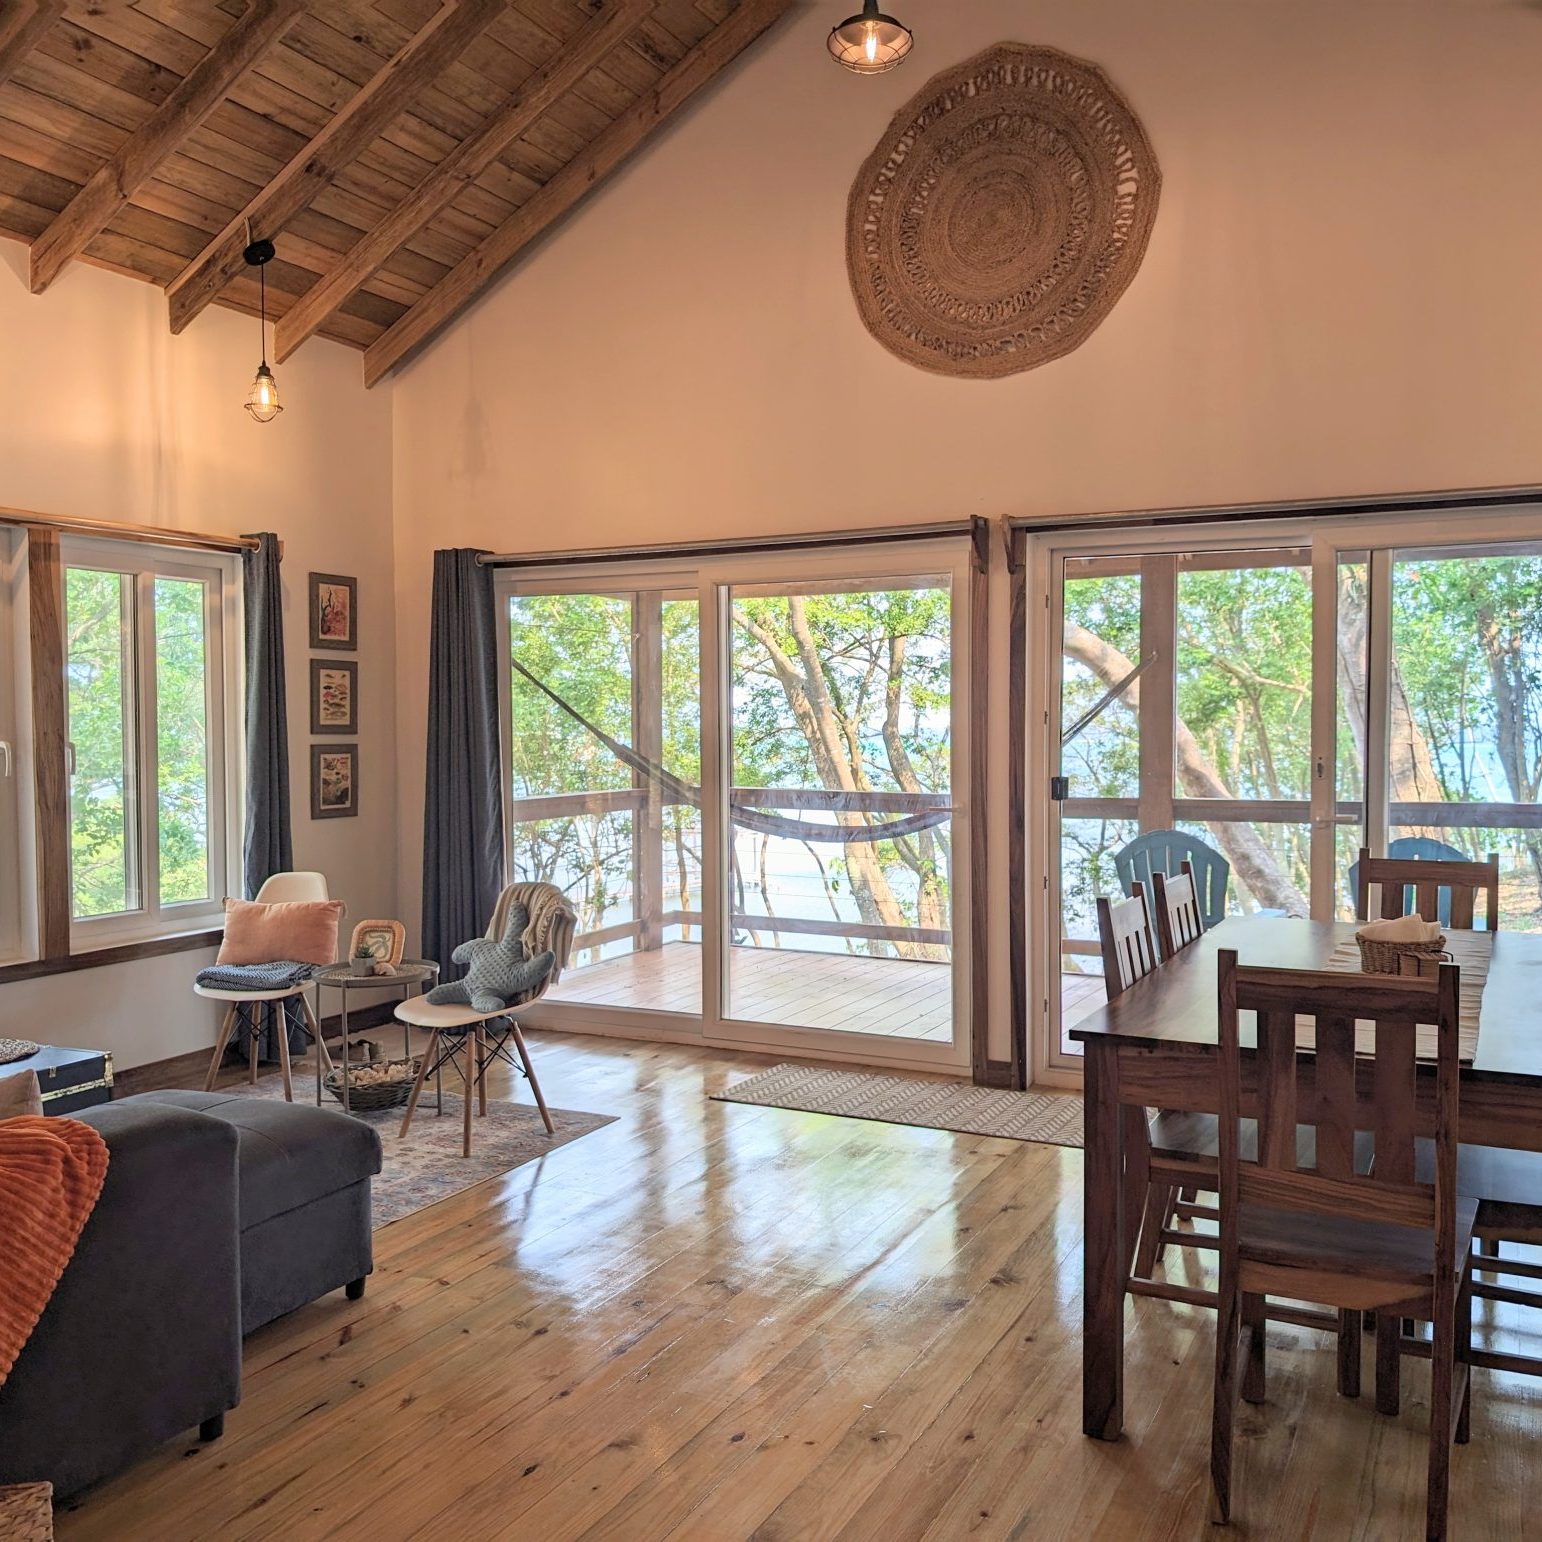 Spacious dining and living area with ocean view in Caribbean reef and jungle cabin, Morada Coralina.